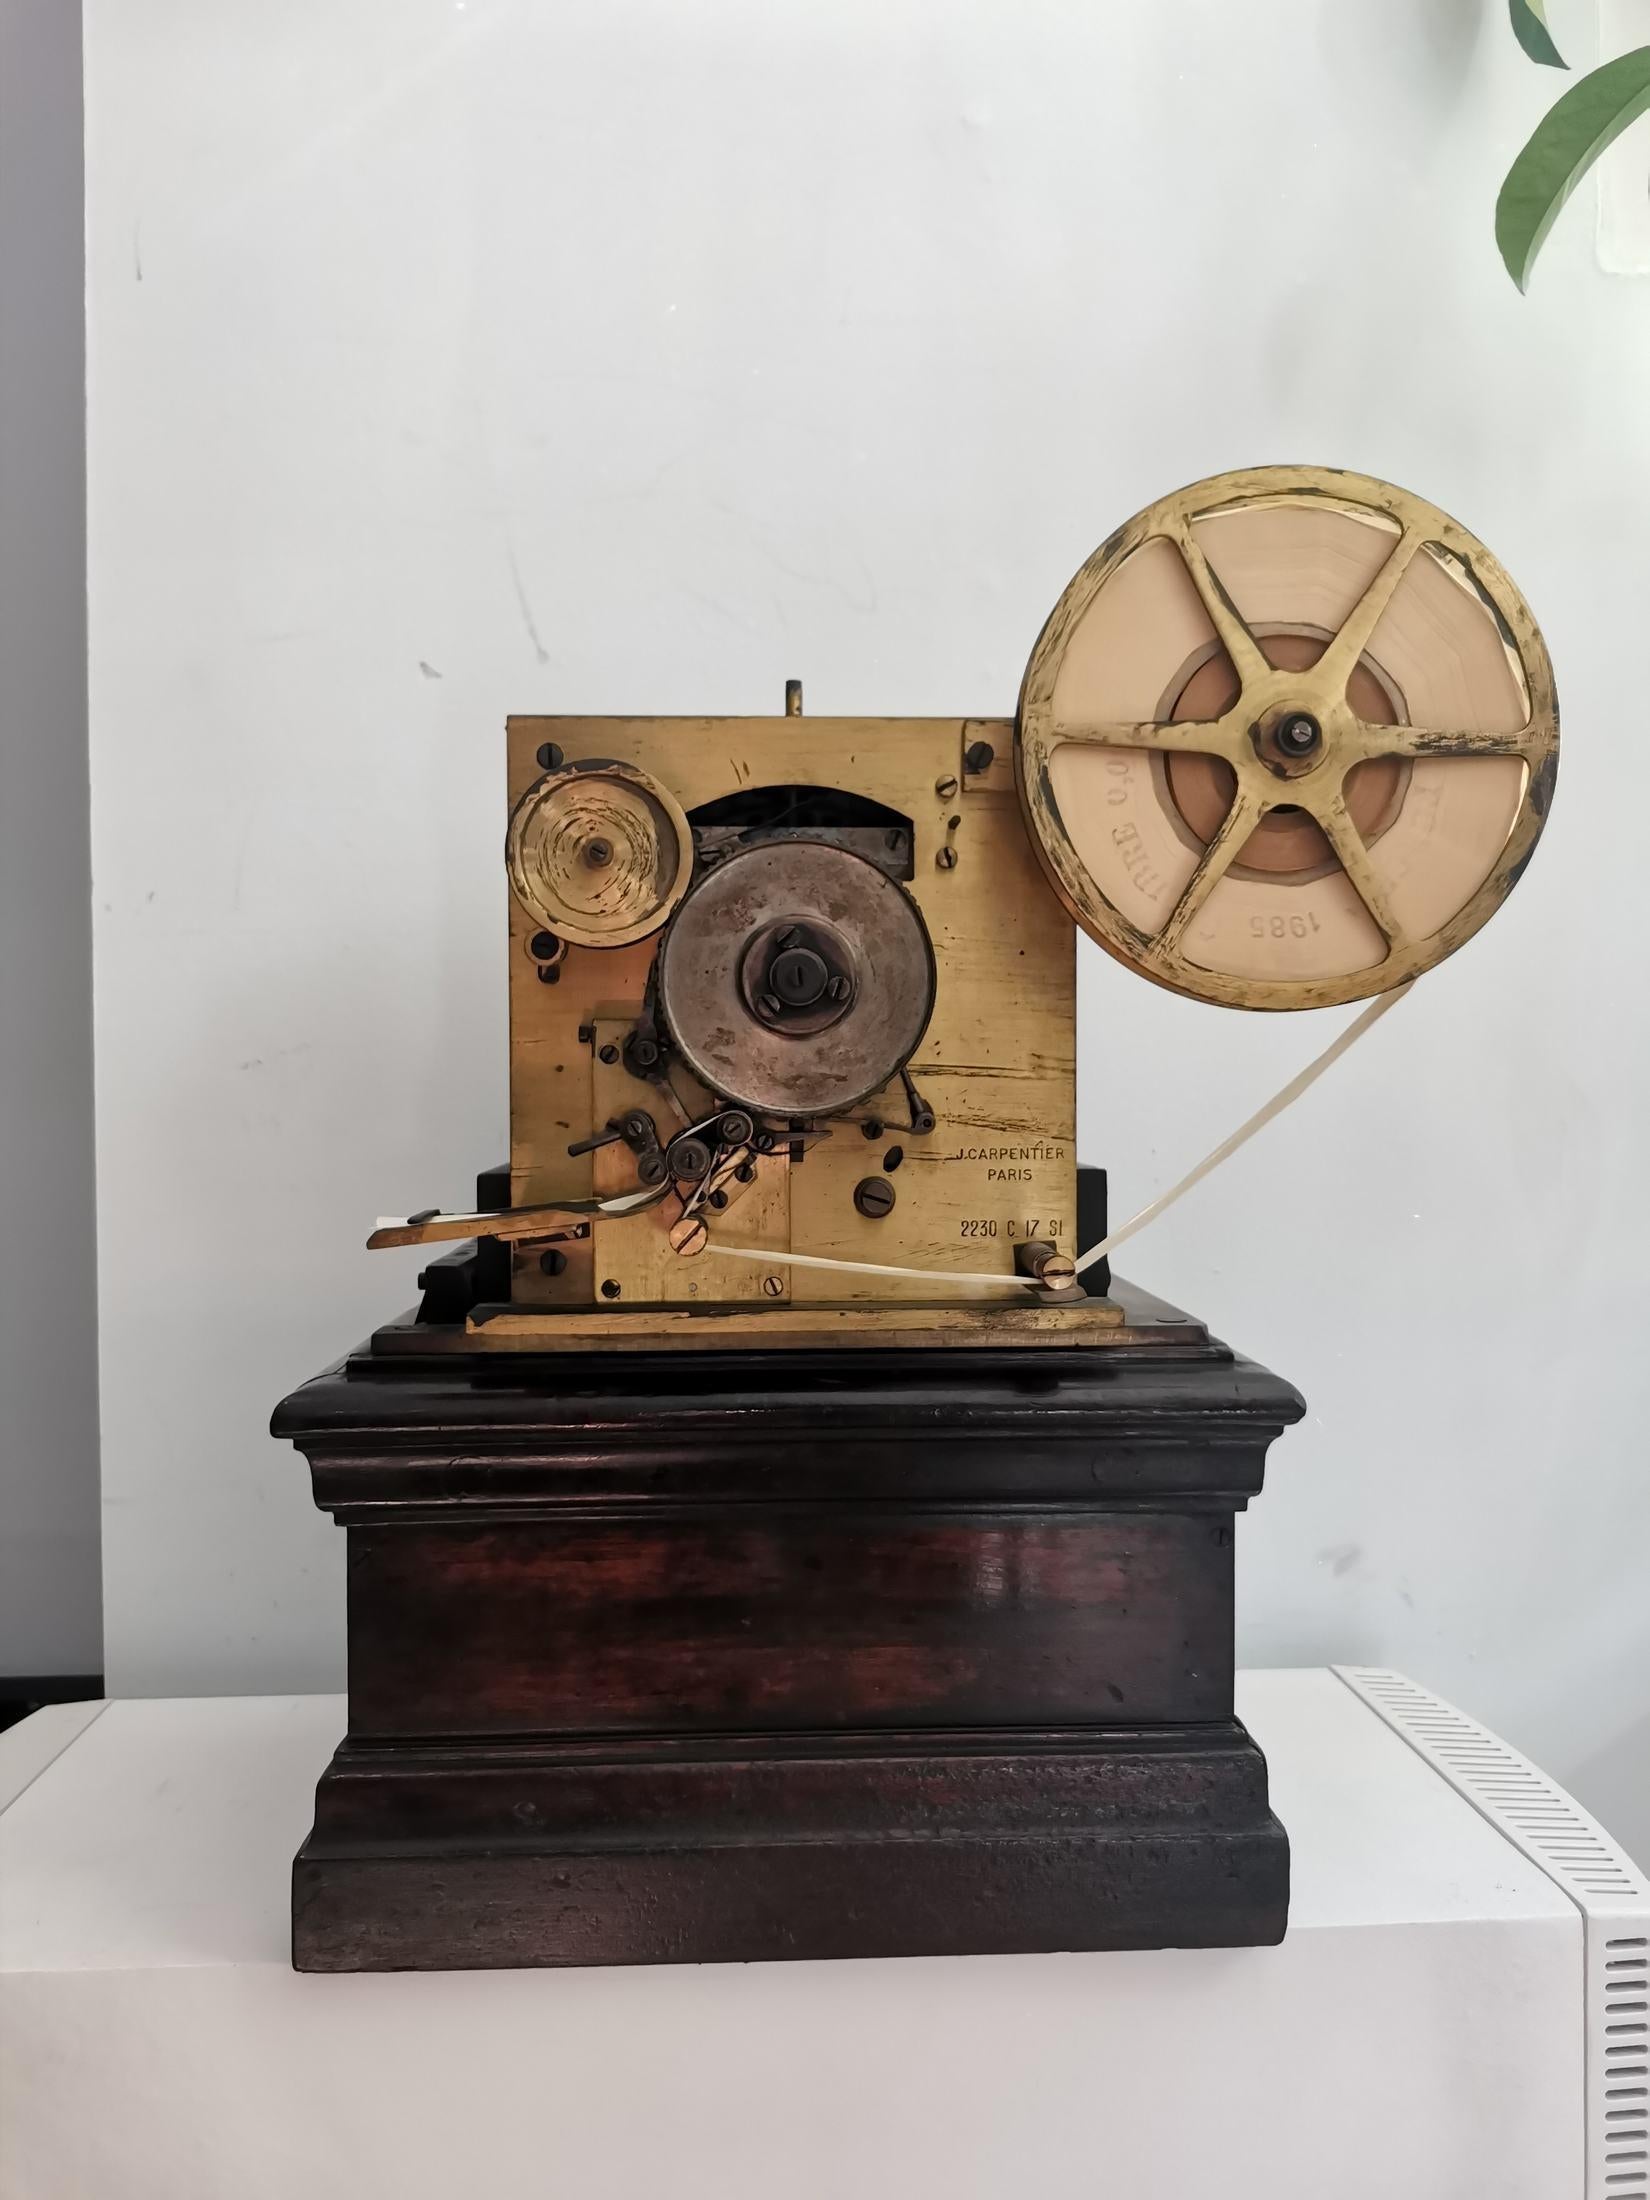 Baudot multiple-impression telegraph, c. 1900 Manufactured by J Carpentier Paris, 
brass and steel, Grunewald type electric motor mounted upside down. 
For the five-bit Baudot code. 
With constantly rotating print wheel and five internal relays